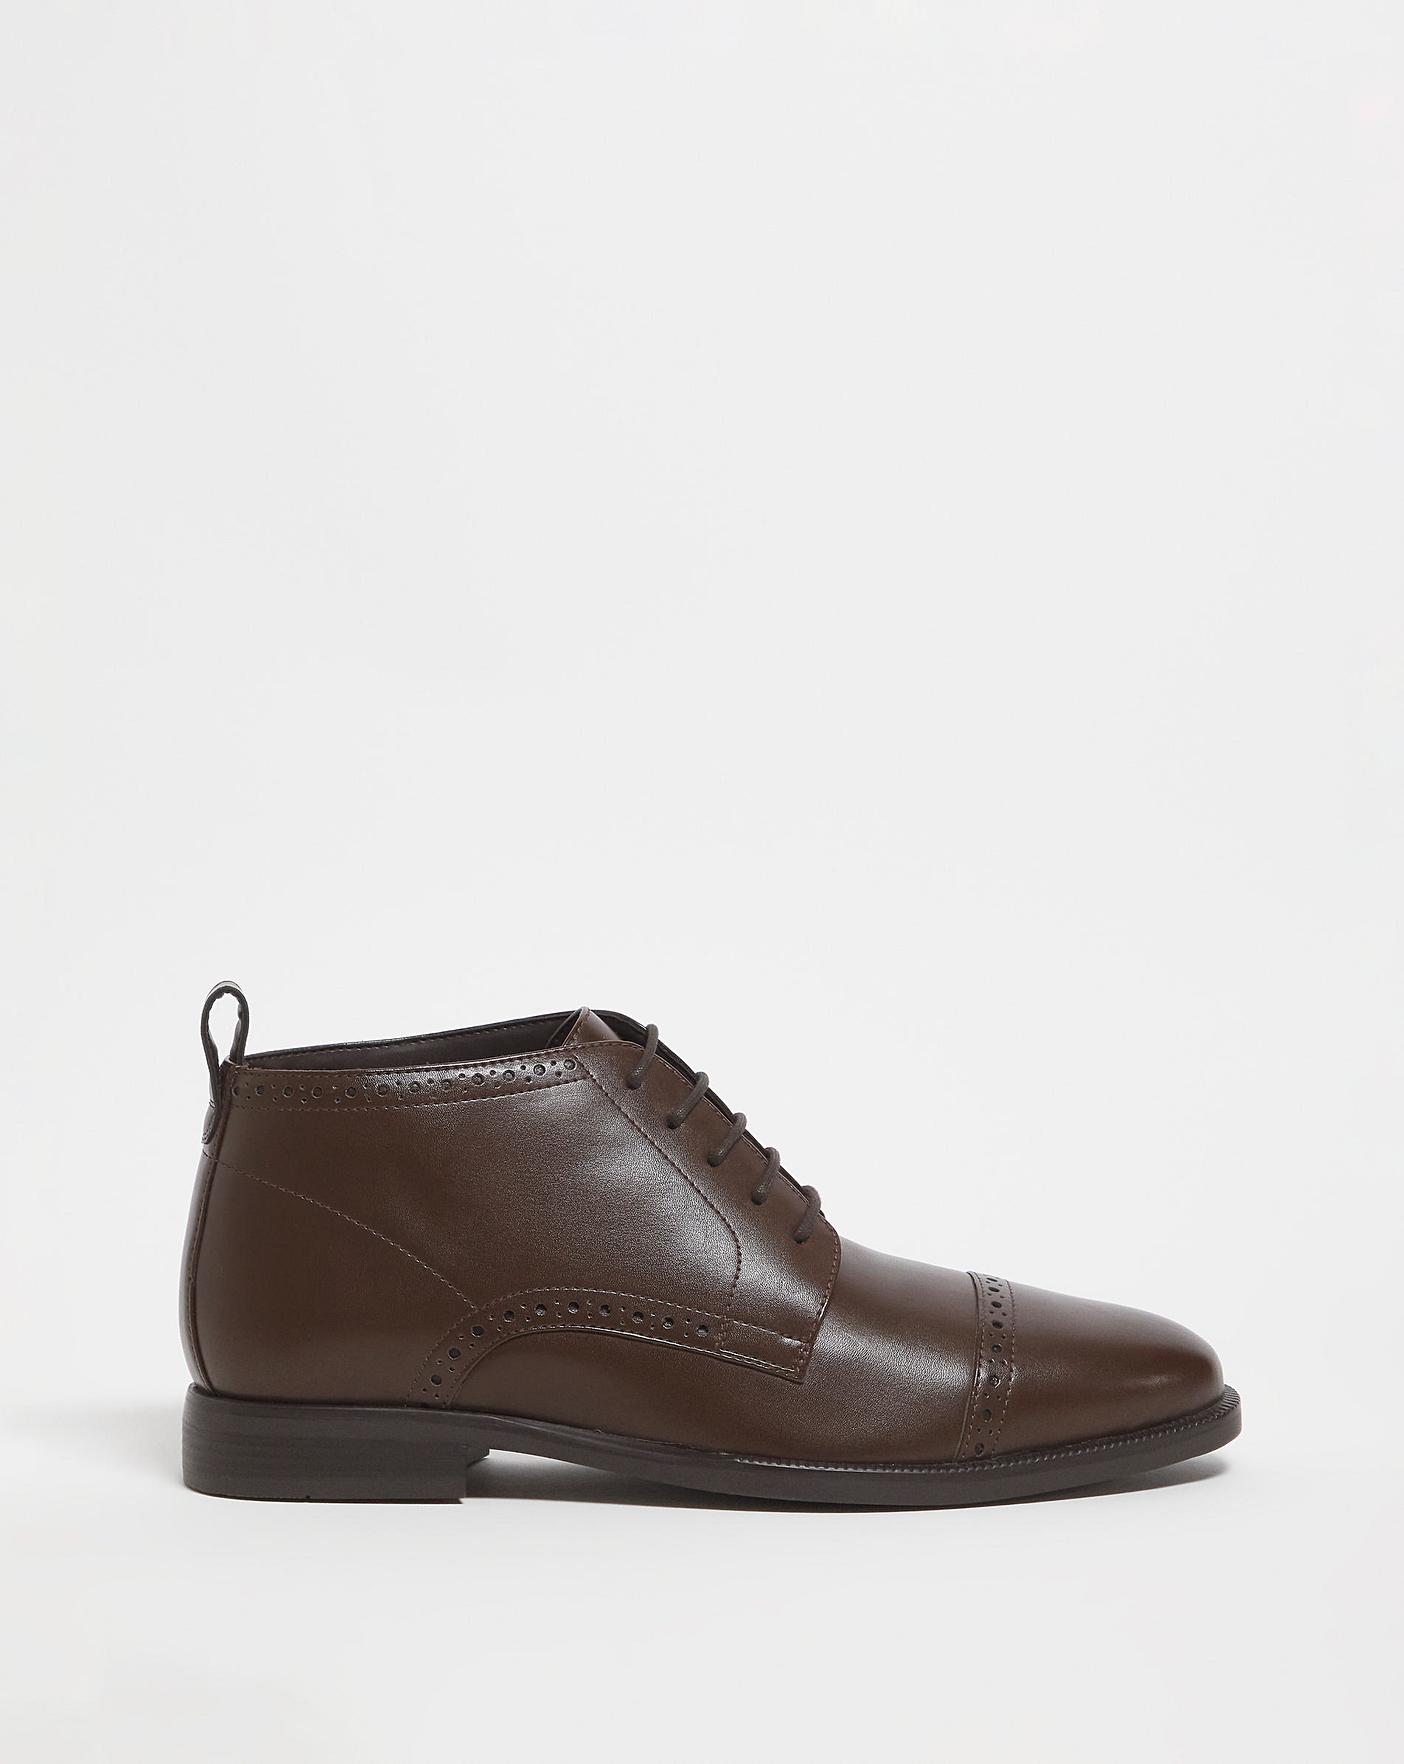 Leather Look Formal Chukka Boot Wide